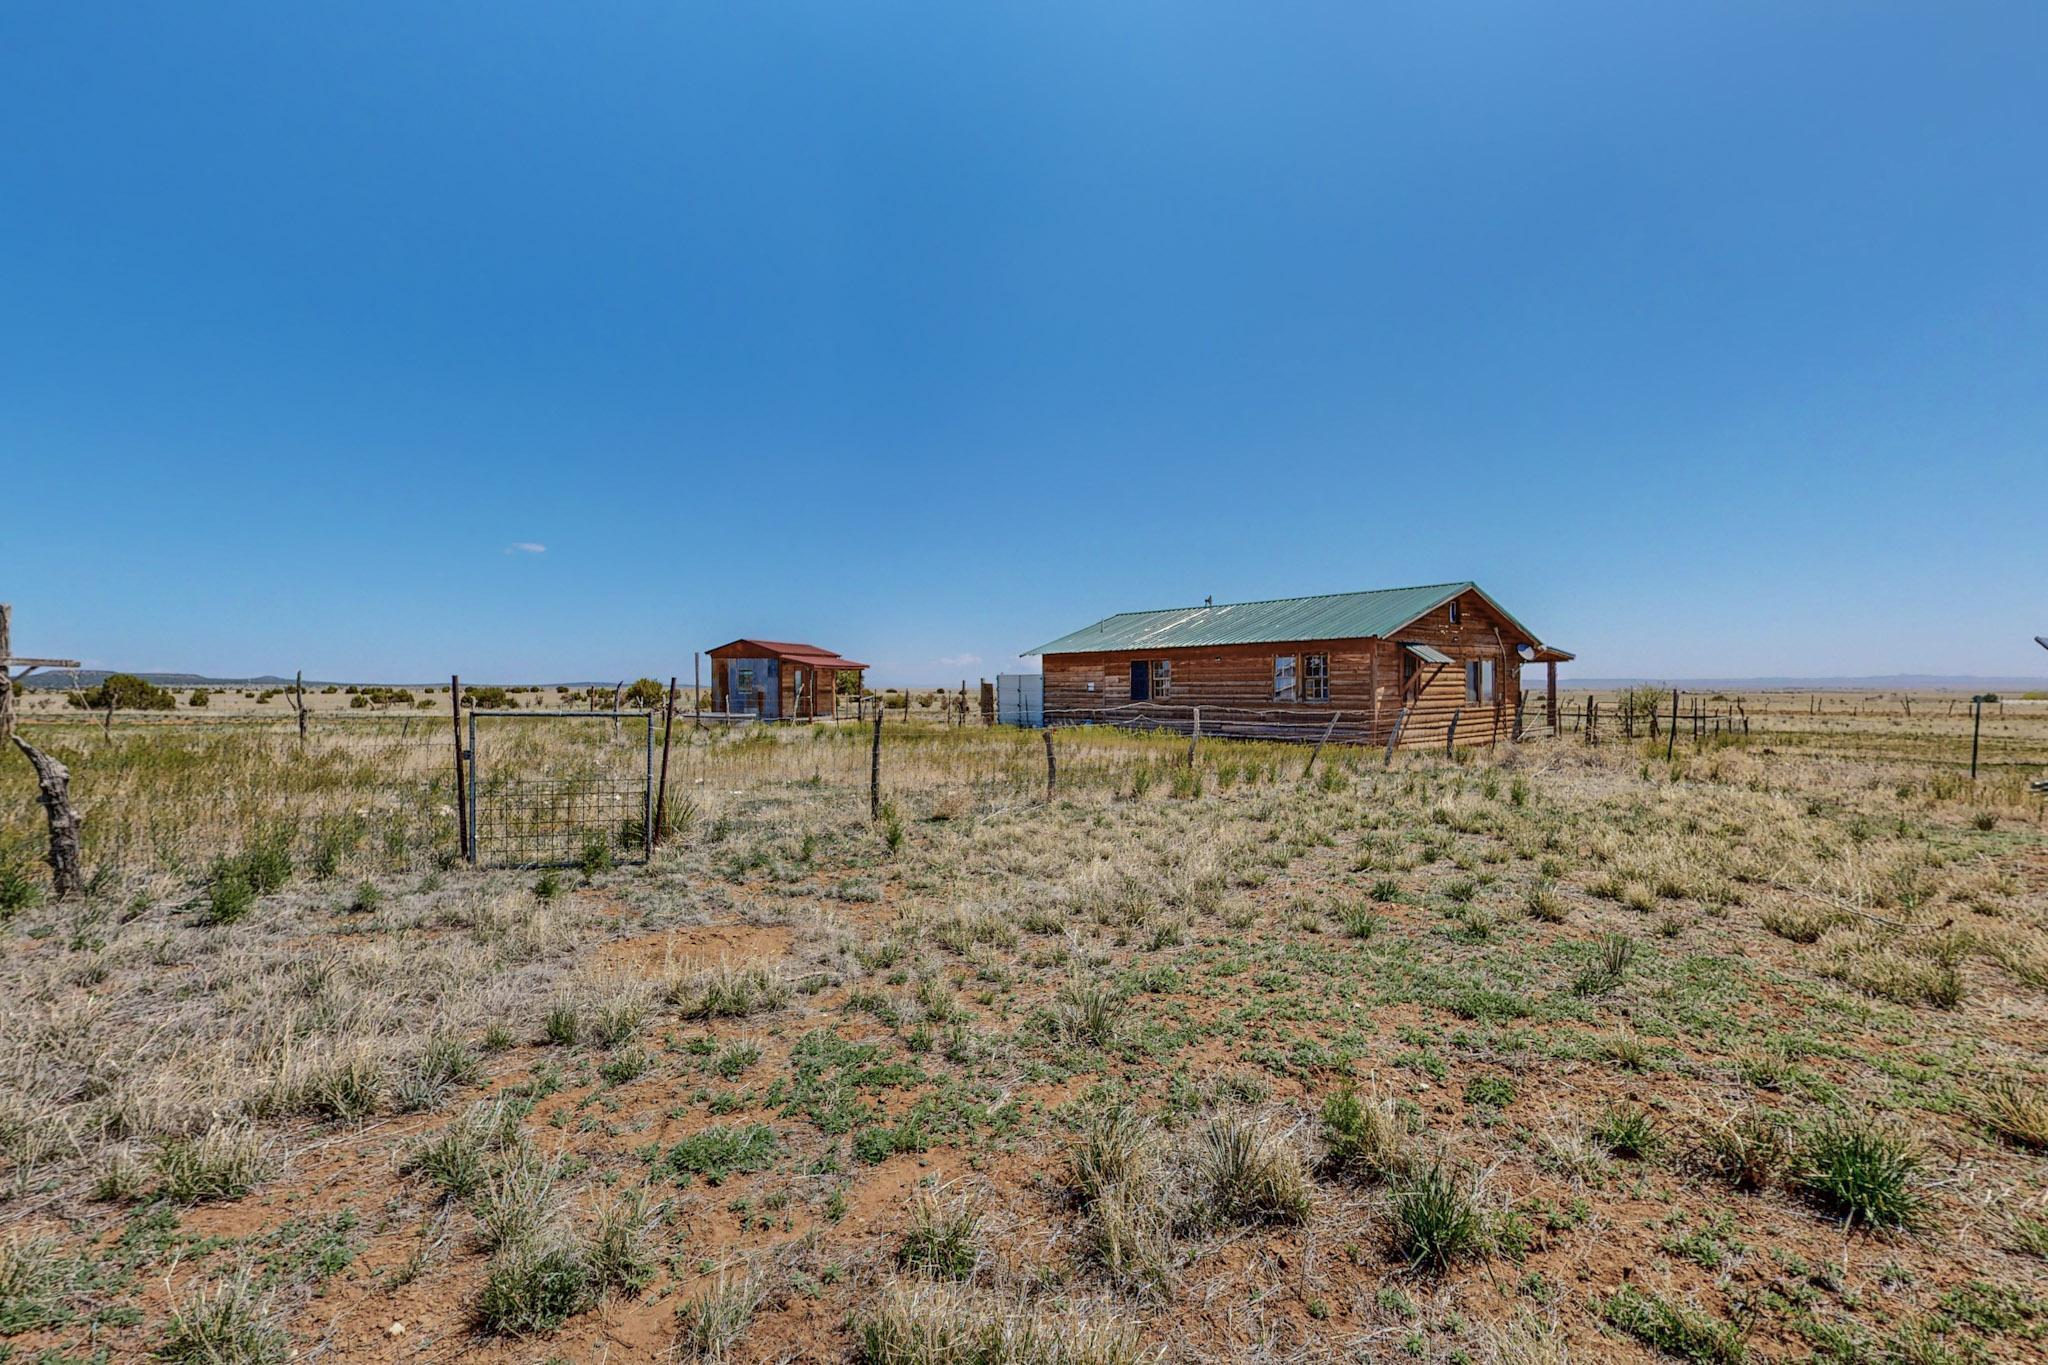 550 Peacock Road, McIntosh, New Mexico 87032, 2 Bedrooms Bedrooms, ,1 BathroomBathrooms,Residential,For Sale,550 Peacock Road,1062119